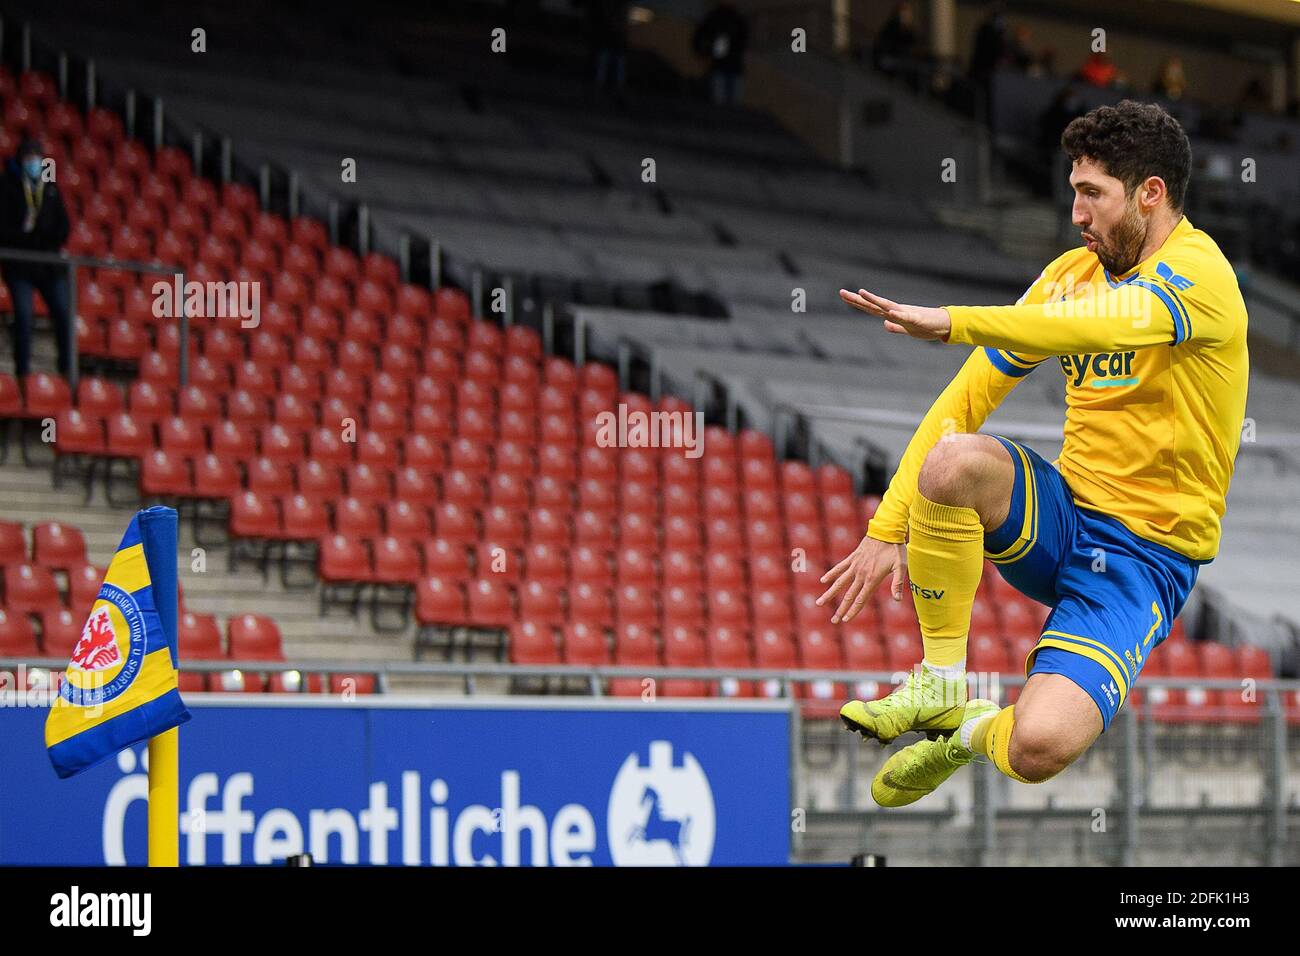 Brunswick, Germany. 05th Dec, 2020. Football: 2nd Bundesliga, Eintracht Braunschweig - FC St. Pauli, 10th matchday at the Eintracht stadium. Braunschweig's Fabio Kaufmann cheers after his goal for 2:1. Credit: Swen Pförtner/dpa - IMPORTANT NOTE: In accordance with the regulations of the DFL Deutsche Fußball Liga and the DFB Deutscher Fußball-Bund, it is prohibited to exploit or have exploited in the stadium and/or from the game taken photographs in the form of sequence images and/or video-like photo series./dpa/Alamy Live News Stock Photo